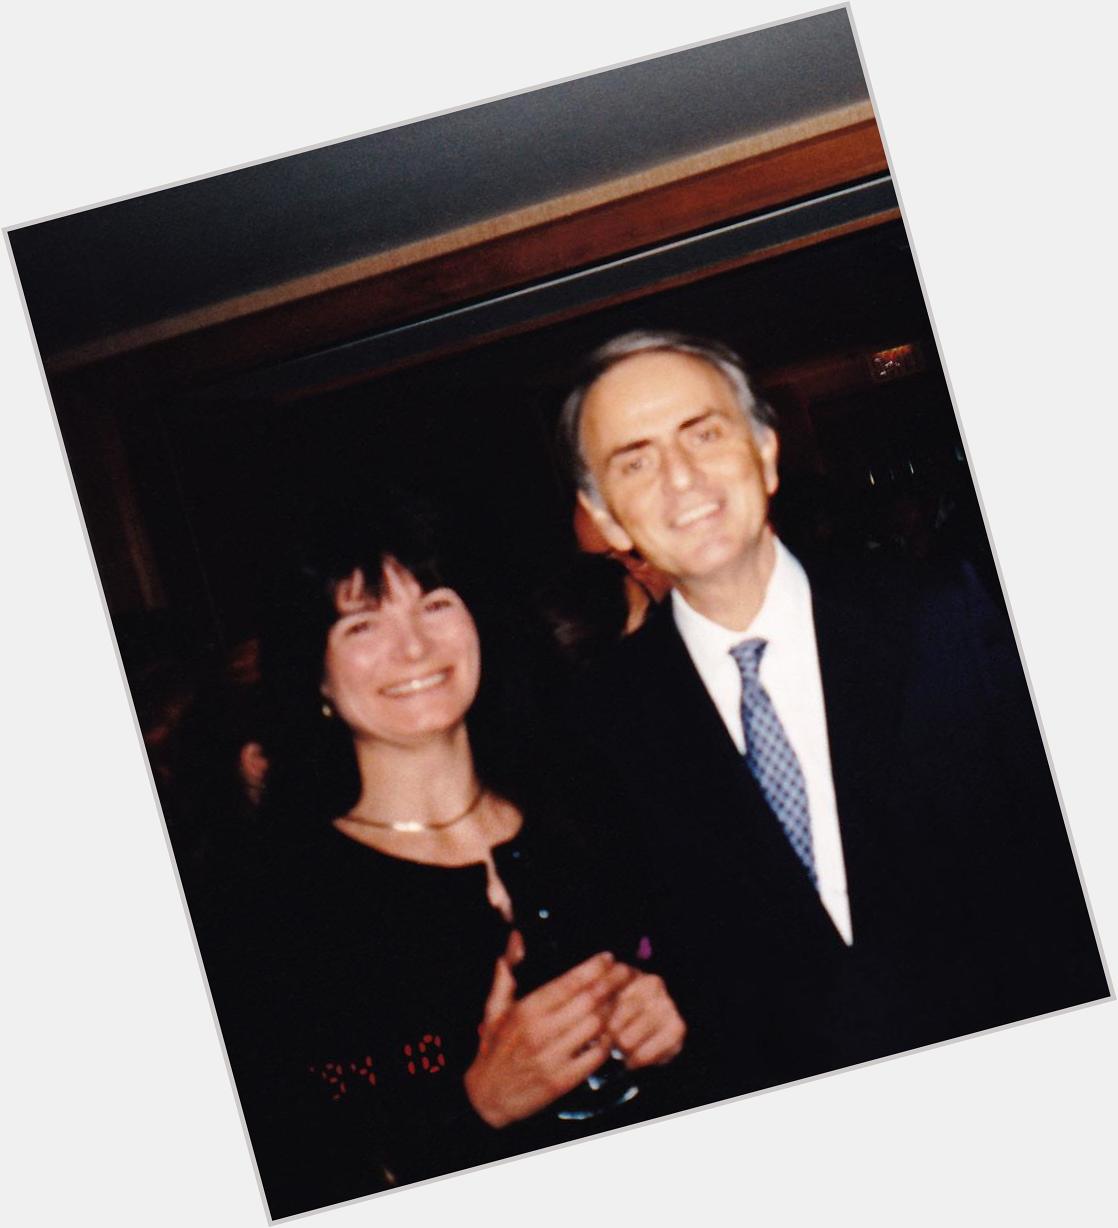 Beaming cosmic Happy Birthday greetings to my colleague& friend Carl Sagan. Miss you, Carl. Here we are at his 60th 